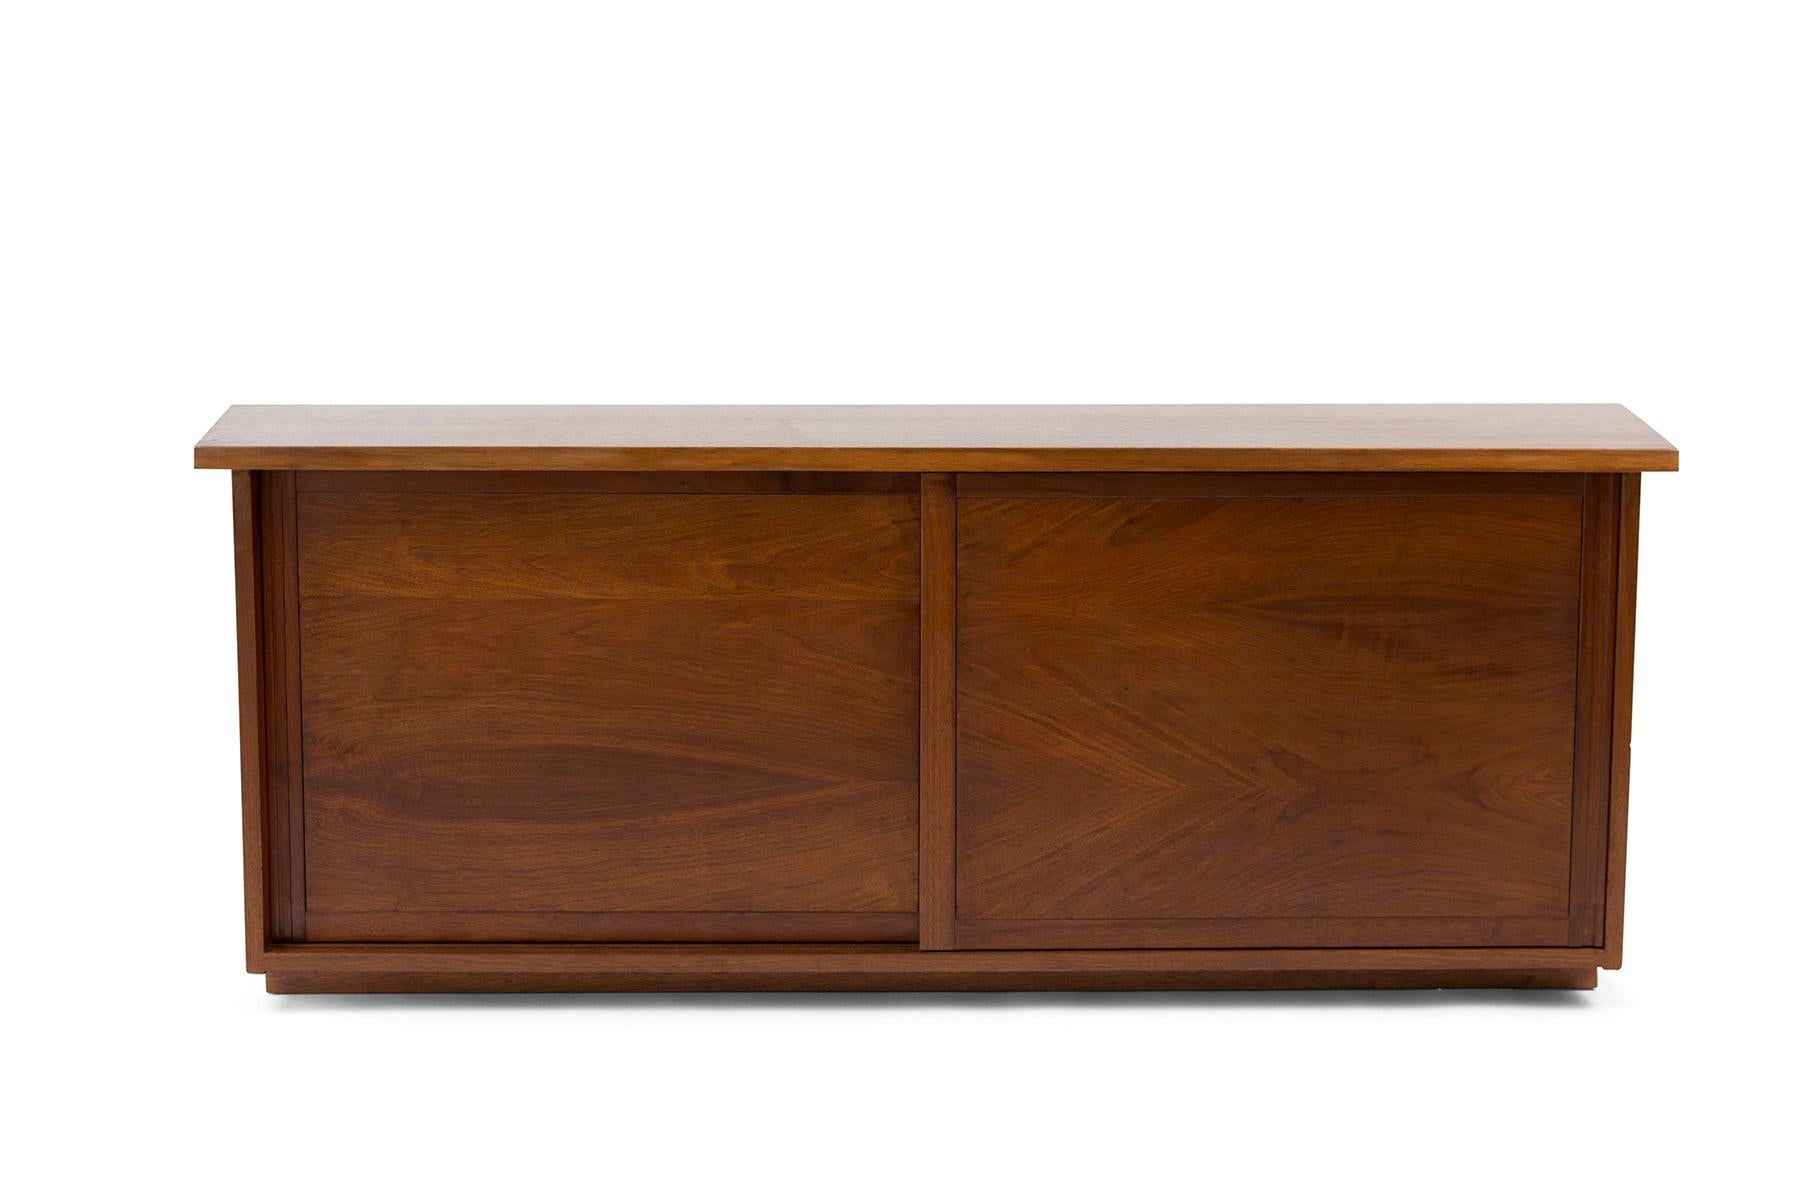 Documented studio crafted walnut credenza or sideboard by George Nakashima from 1959. This stunning example has a beautifully tapered top and sides and two sliding doors. Could be wall-mounted as well.